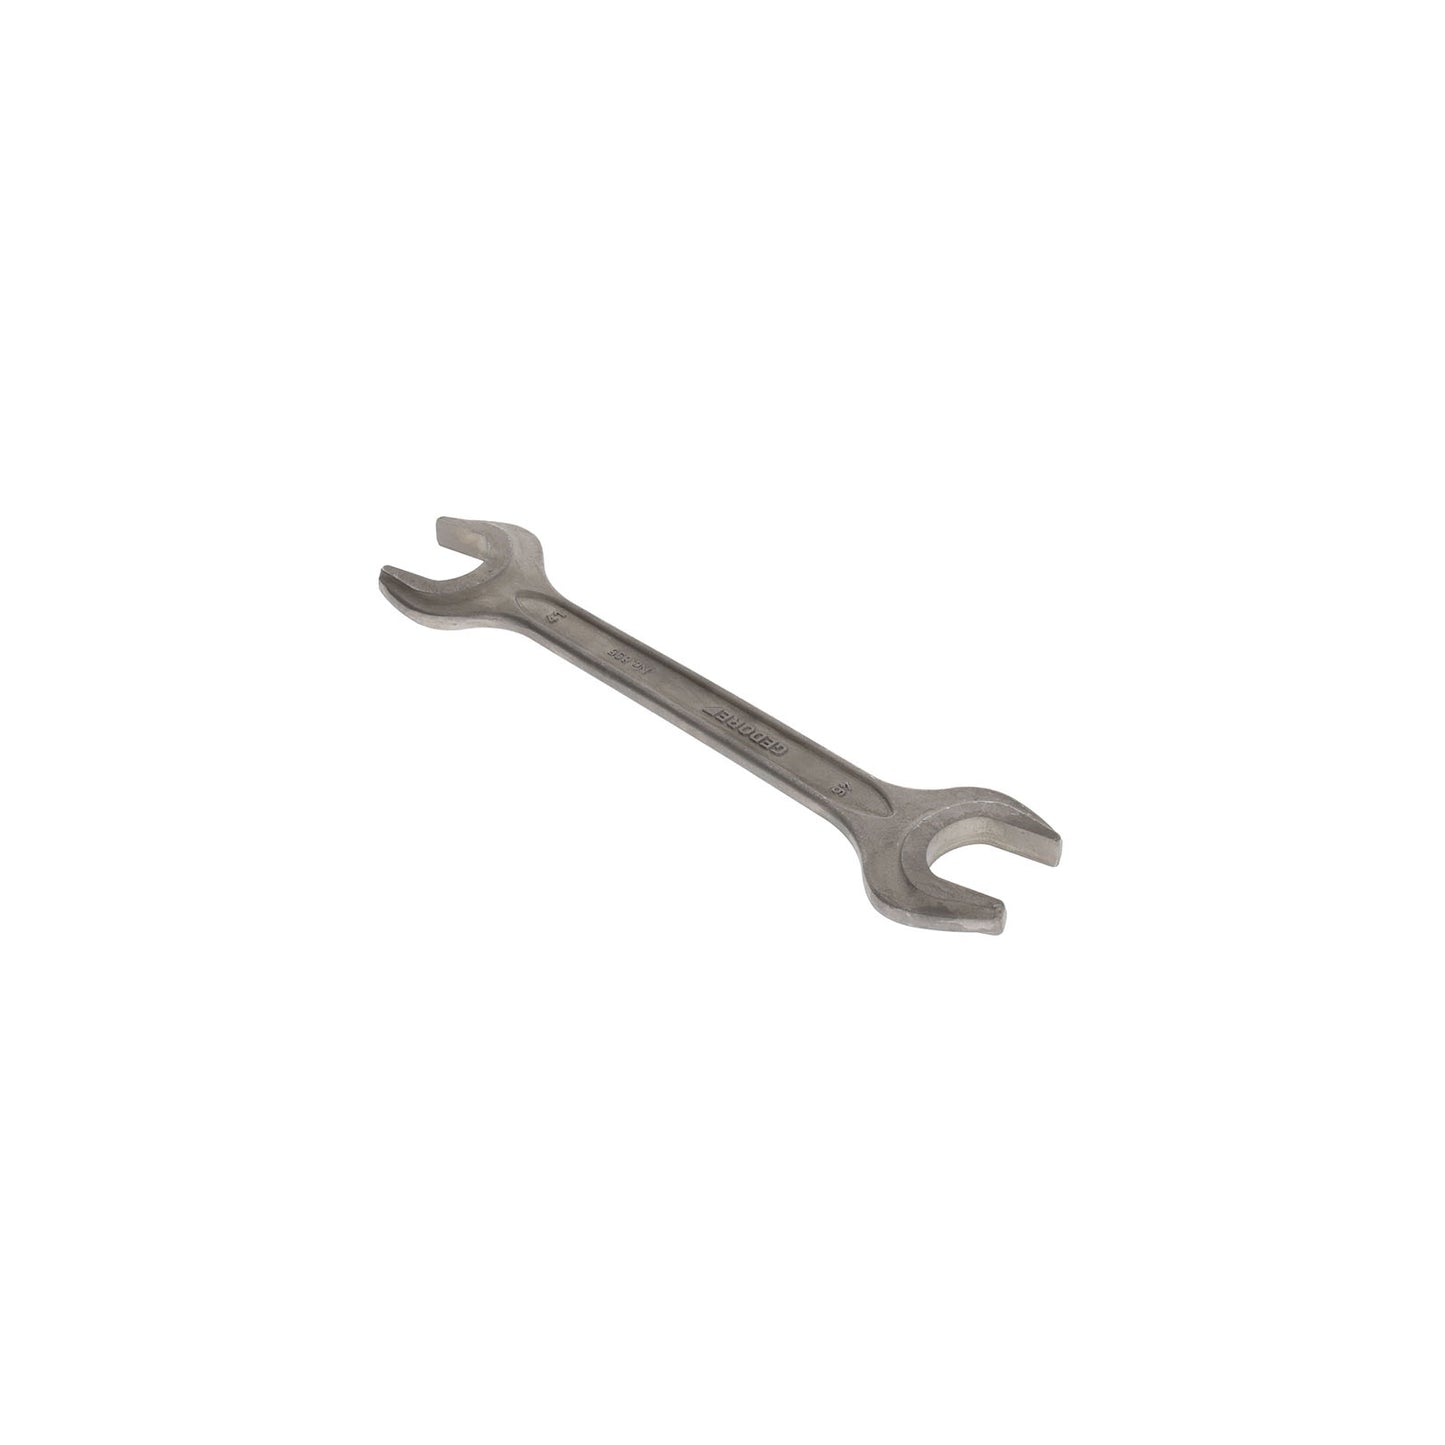 GEDORE 895 41X46 - 2-Mount Fixed Wrench, 41x46 (6588200)